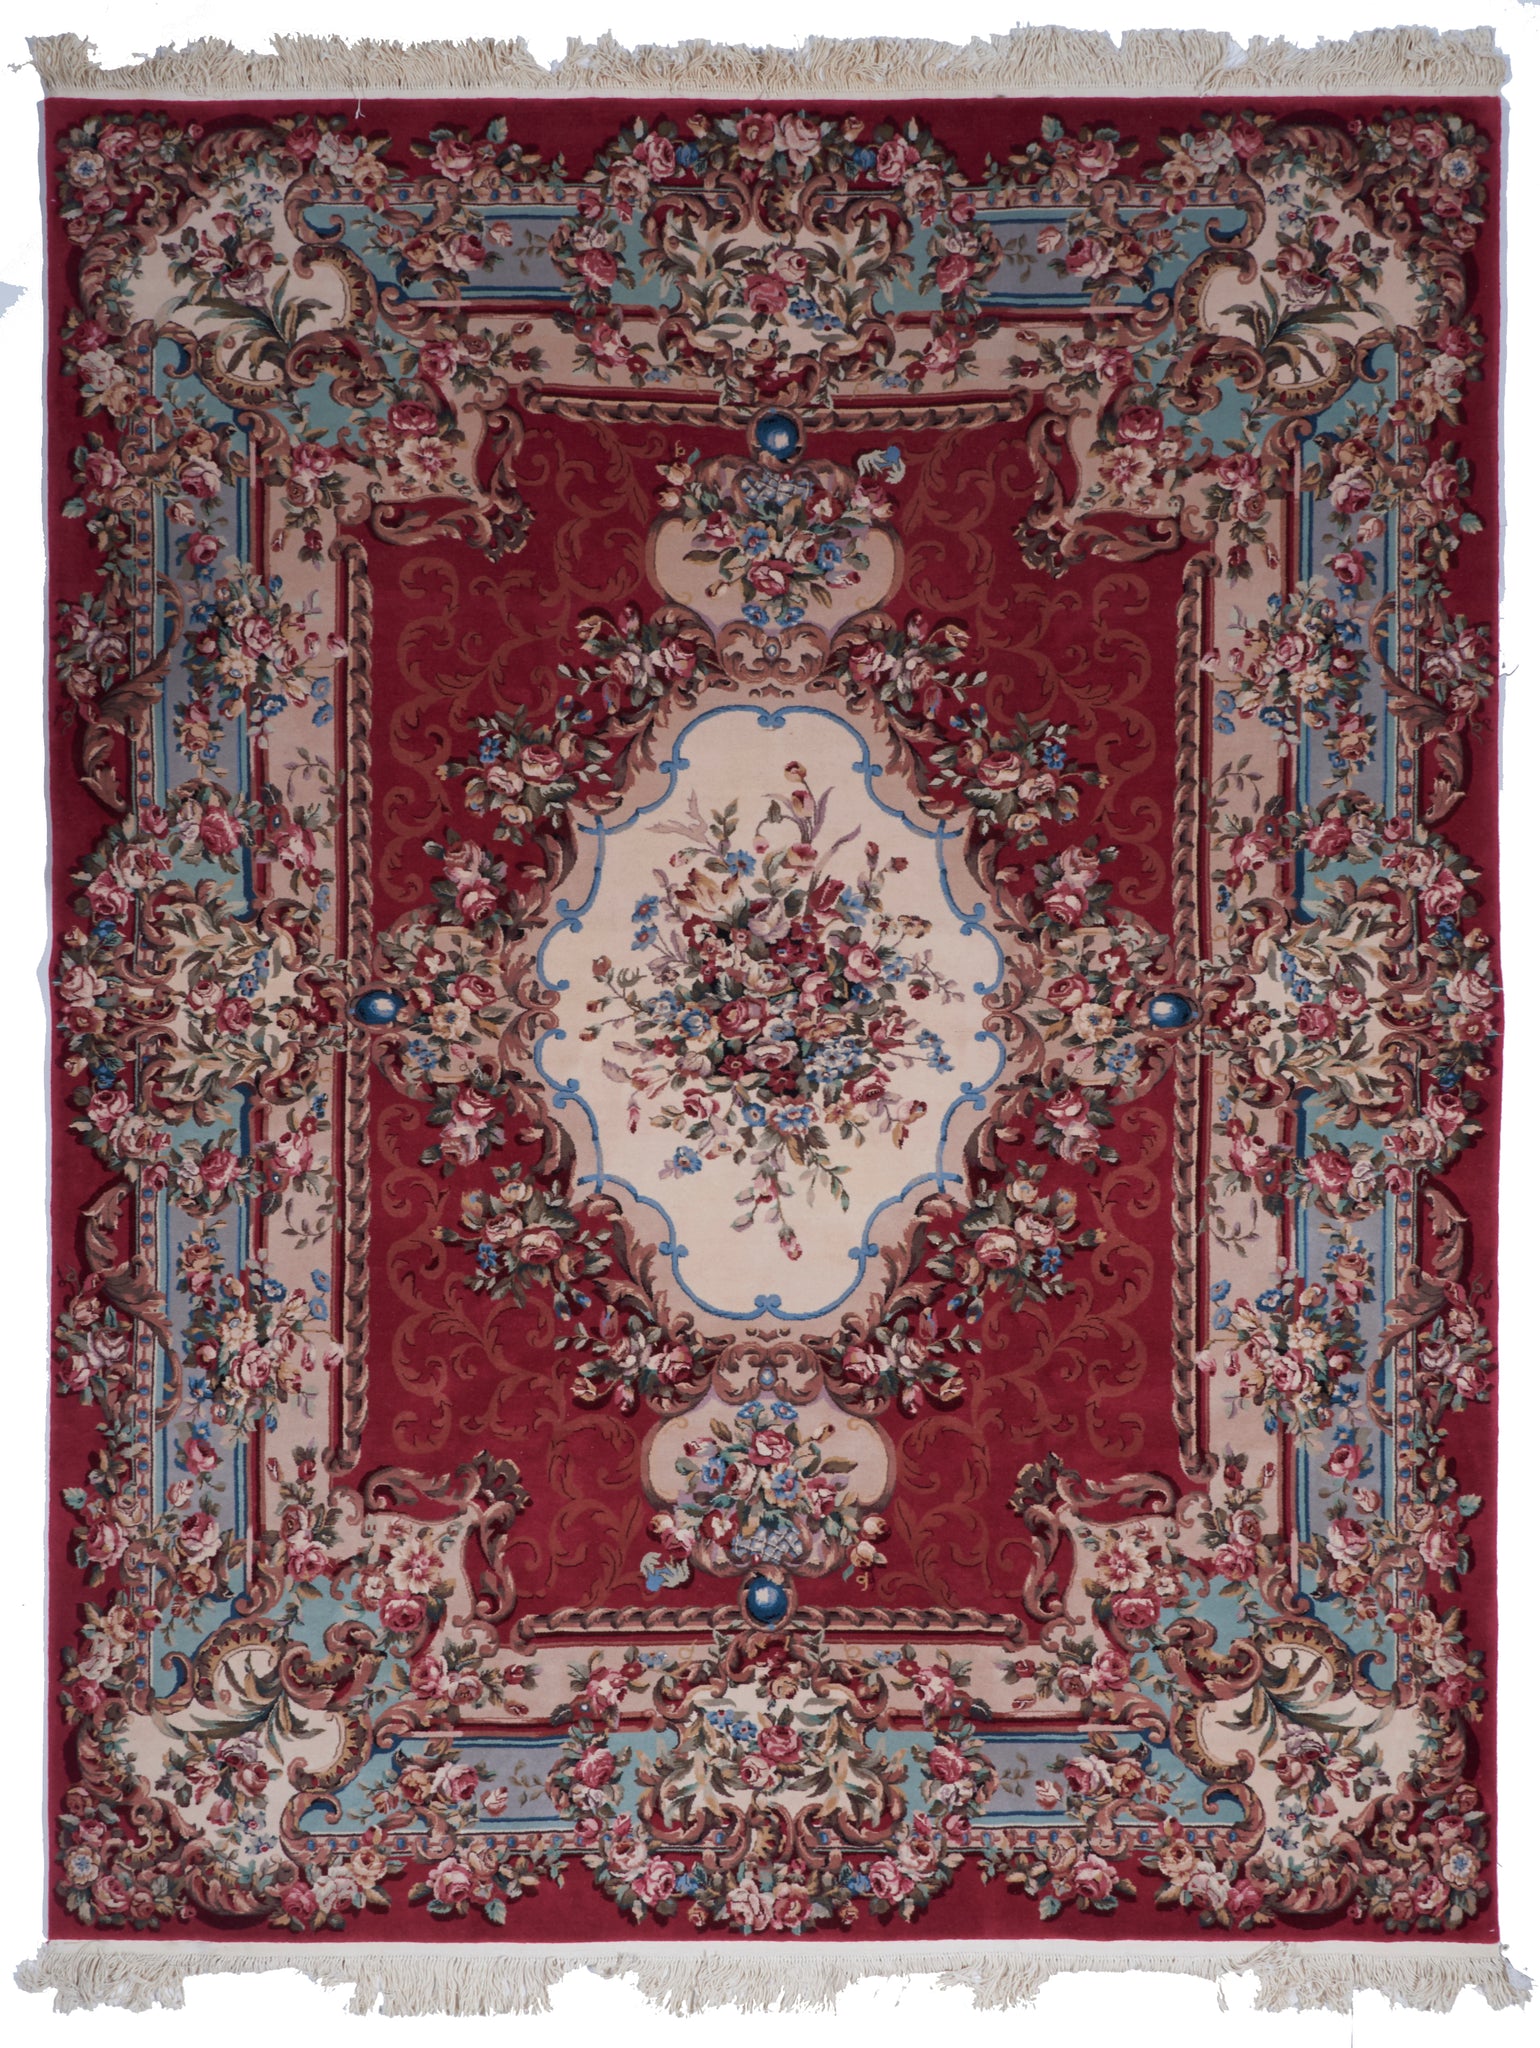 Traditional Hand Knotted Red Ivory Multicolor Wool Rug 7'10 x 10' - IGotYourRug